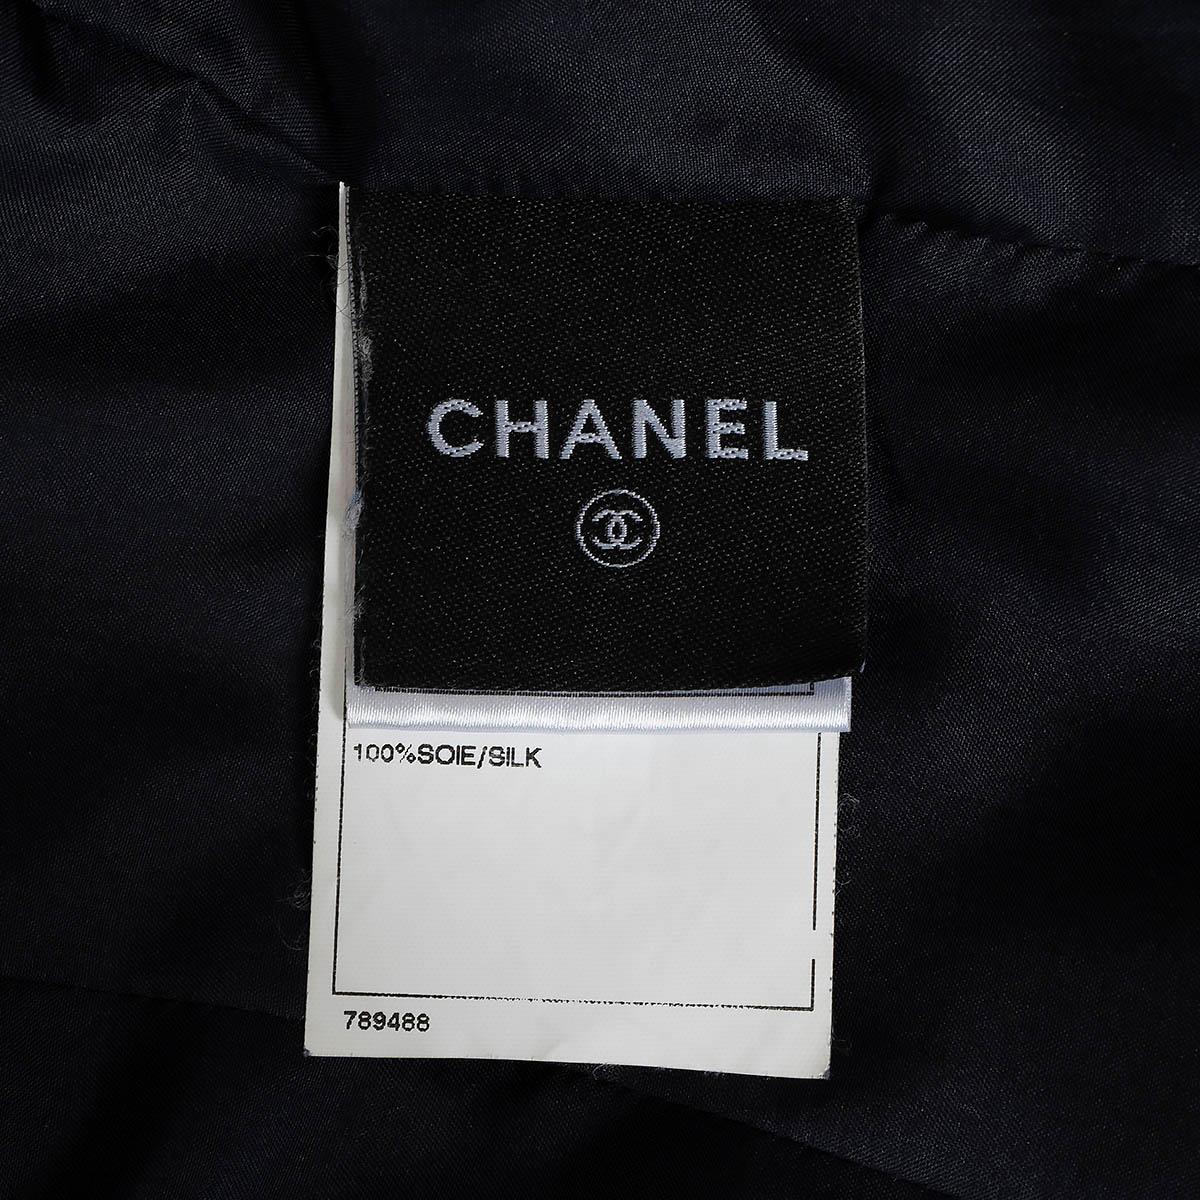 CHANEL navy blue wool 2009 09A TWEED PEACOAT Coat Jacket 40 M For Sale 5